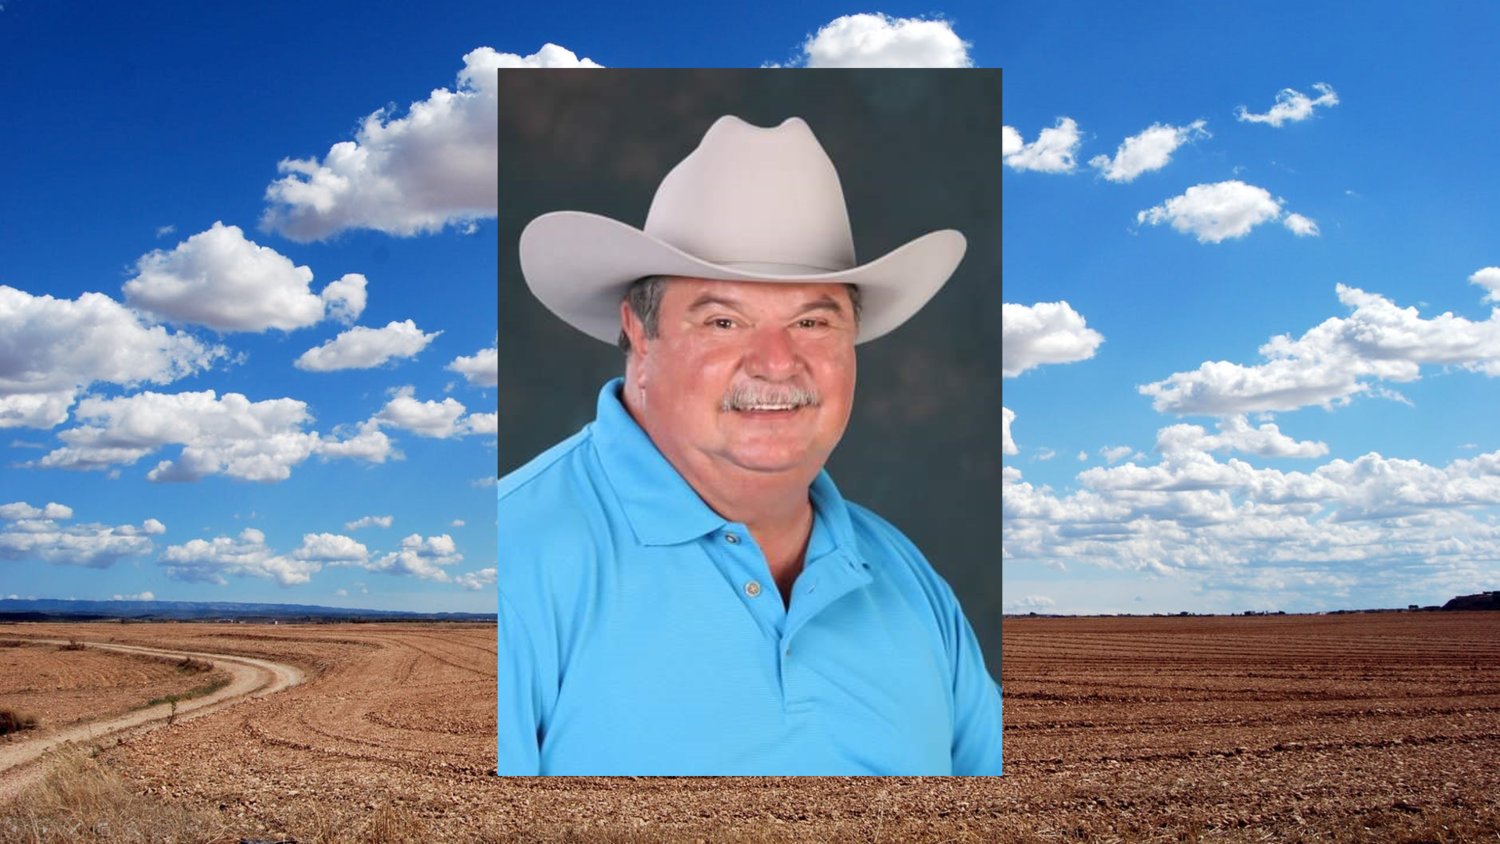 Darrel Royer, 67, of Fulshear, TX died on Thursday, June 25th at Memorial Herman Hospital Memorial City.He is deeply missed by his family and loved ones.